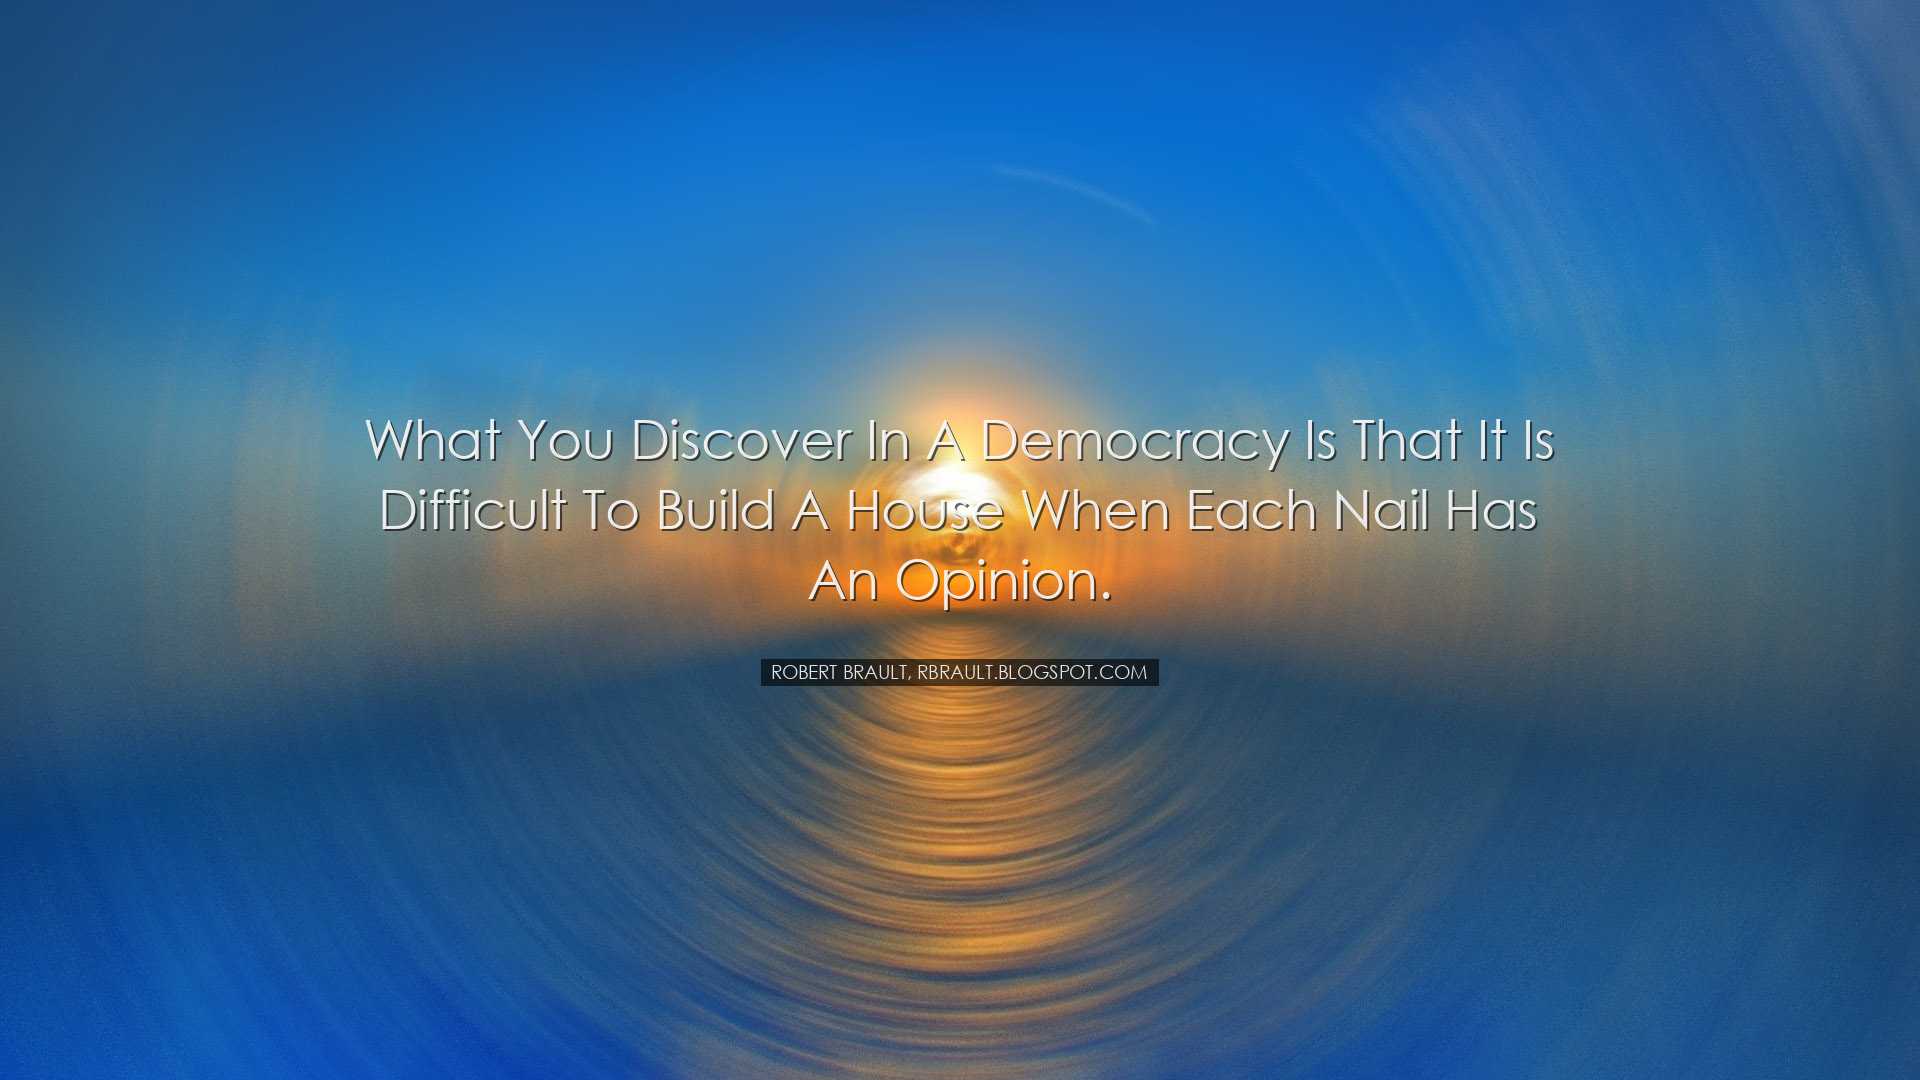 What you discover in a democracy is that it is difficult to build